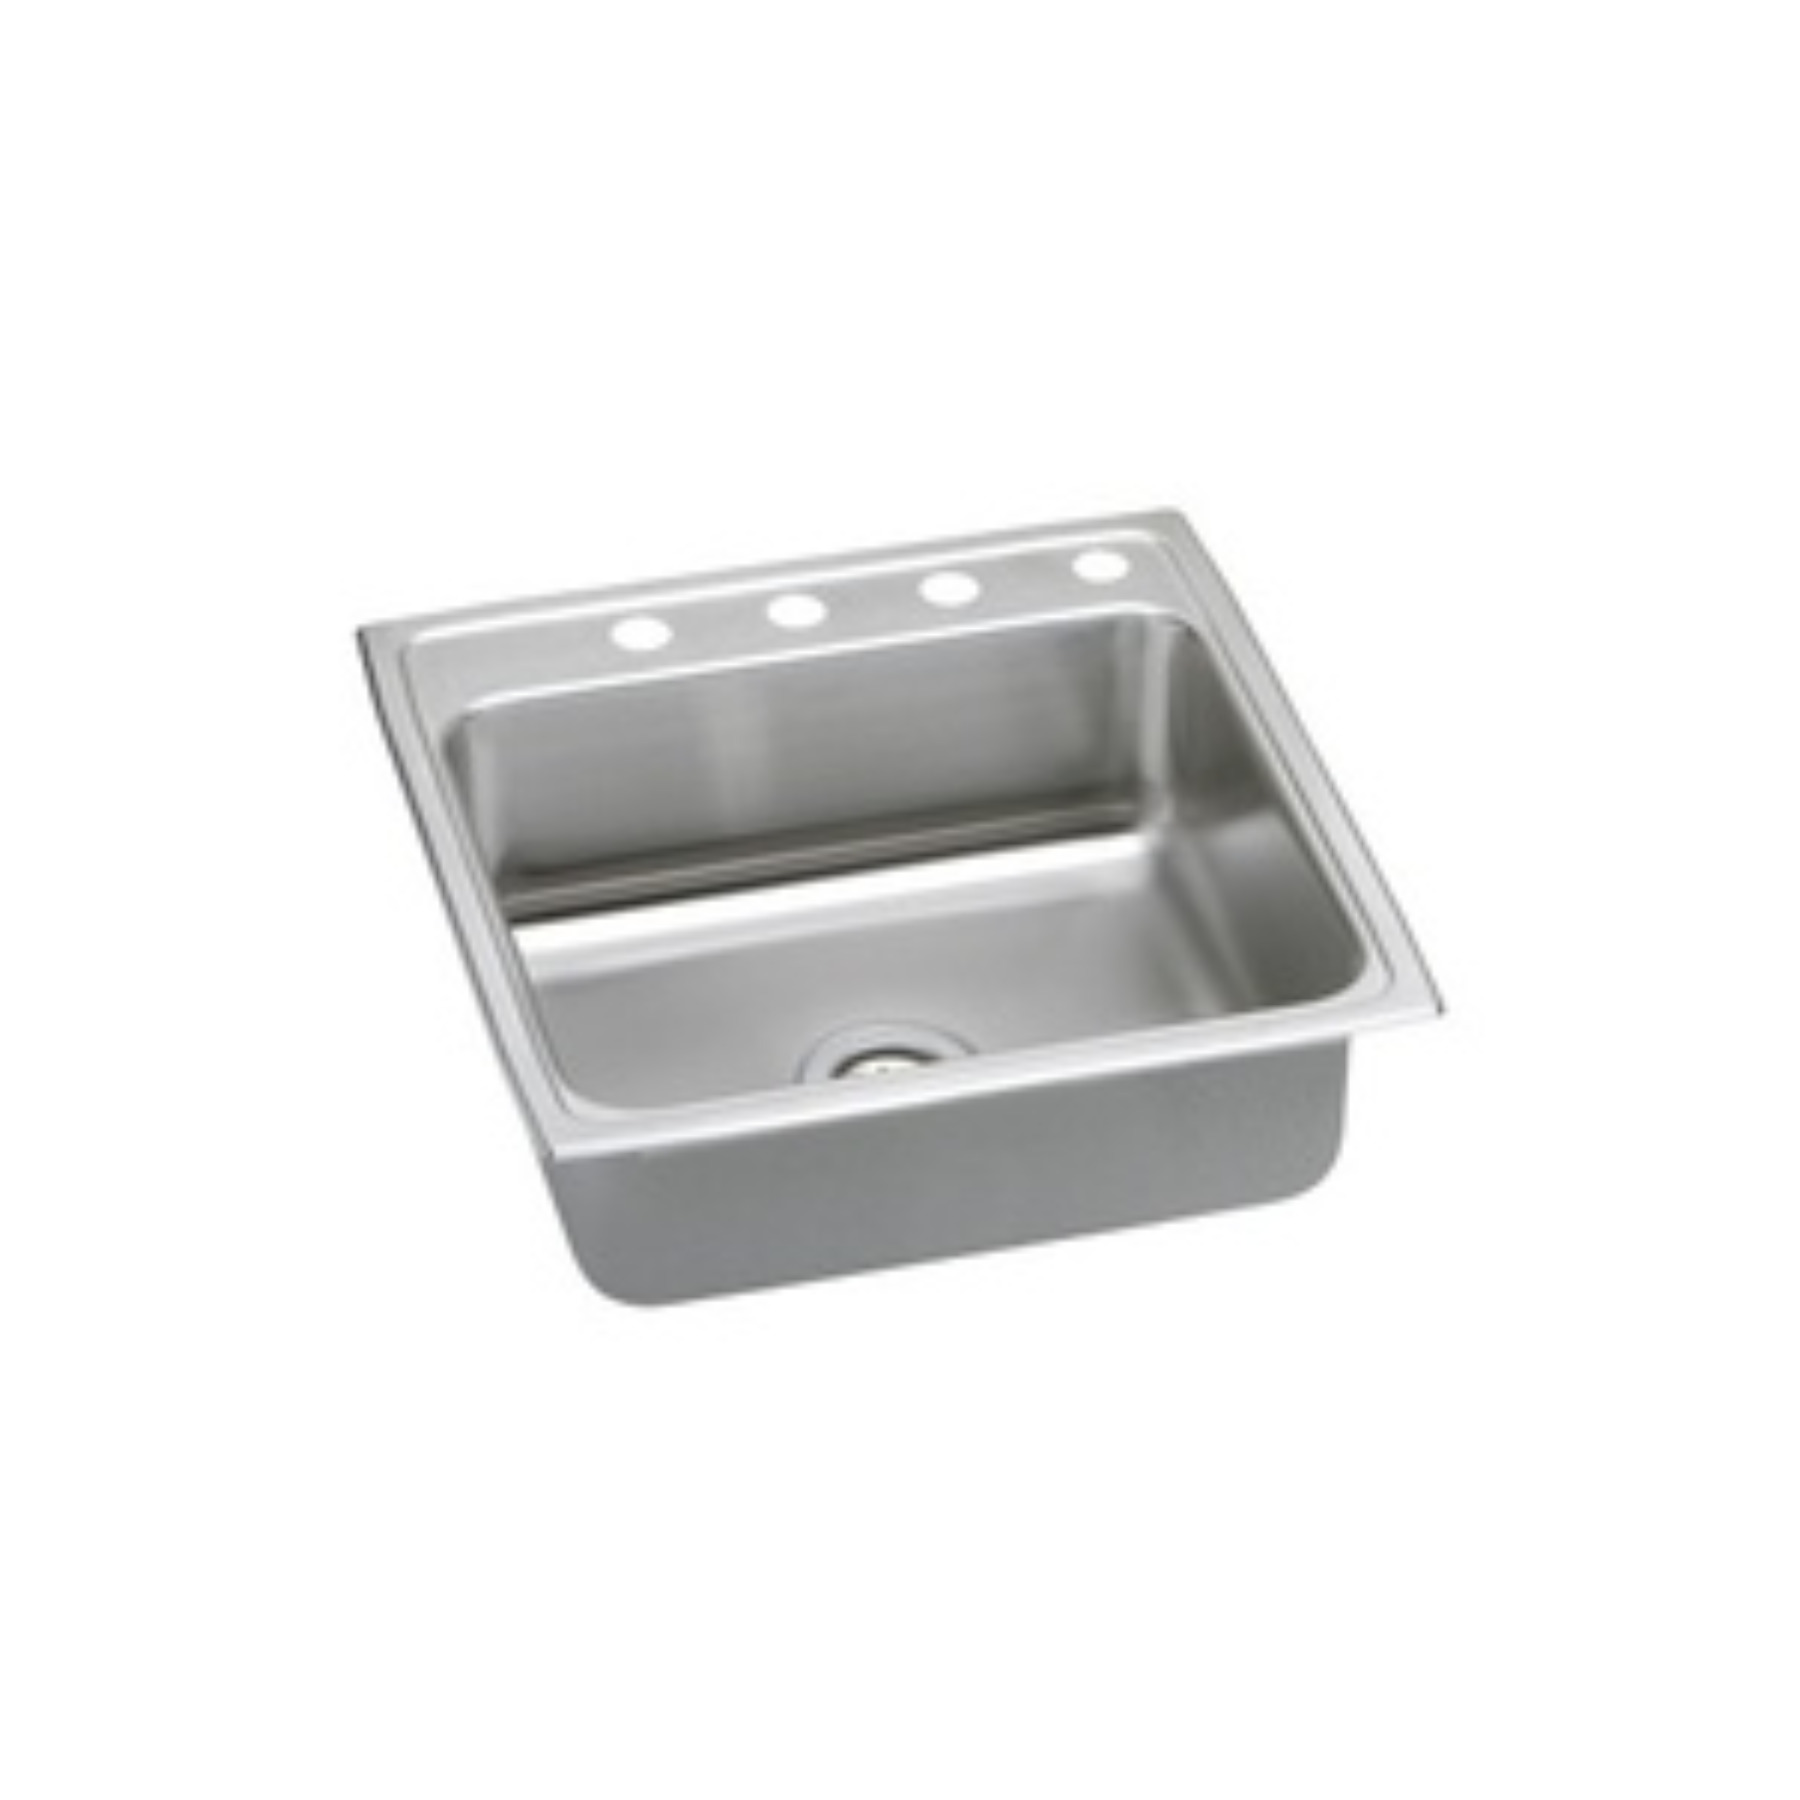 22" x 22" 3 Hole 1 Bowl Stainless Steel Sink Lustertone